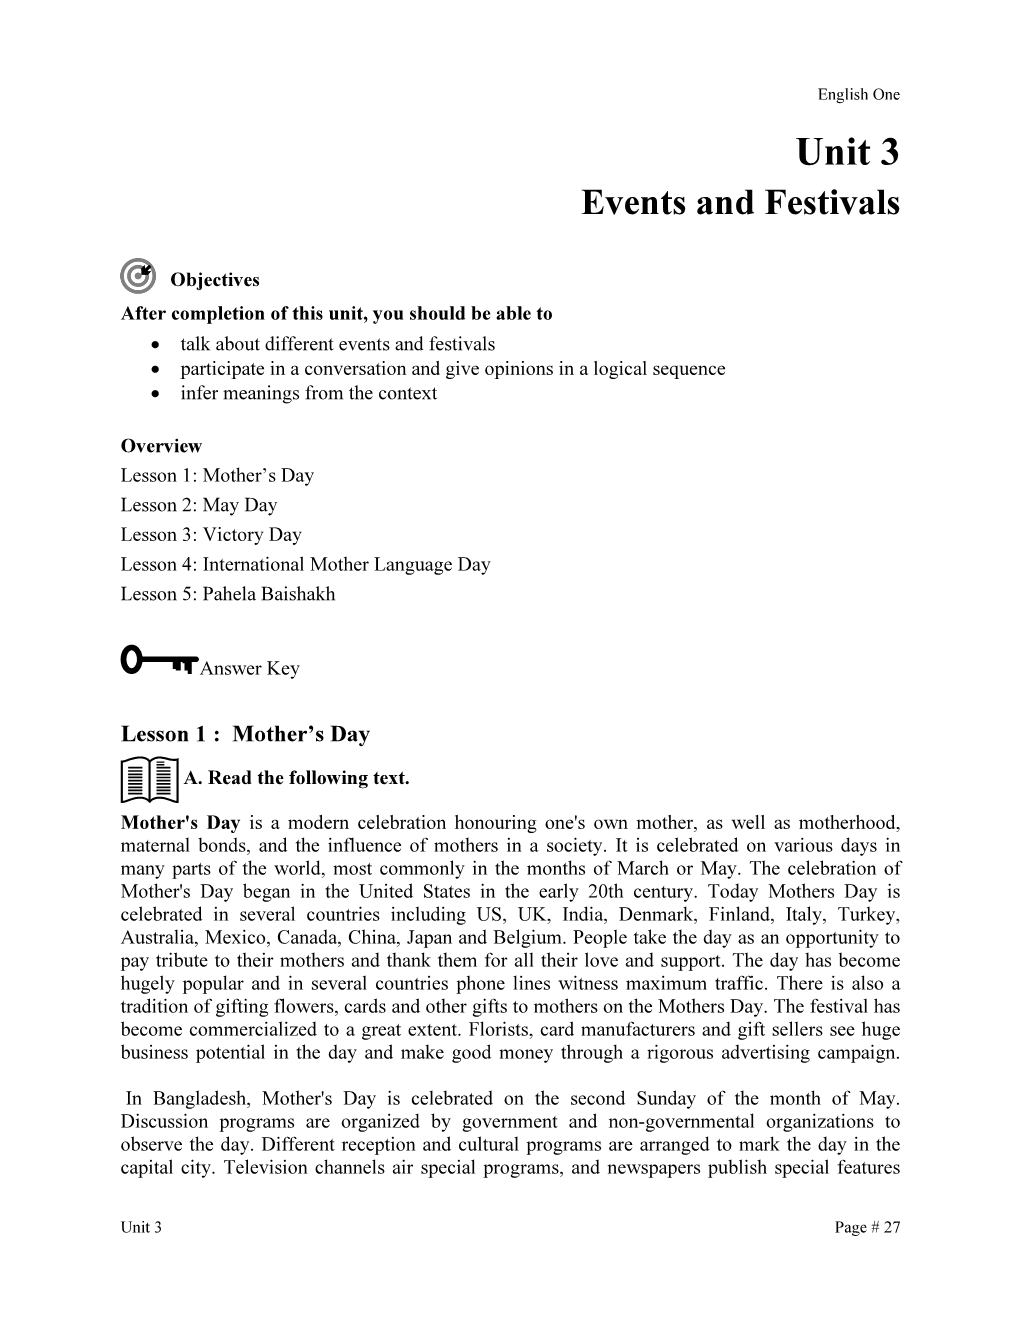 Unit 3 Events and Festivals